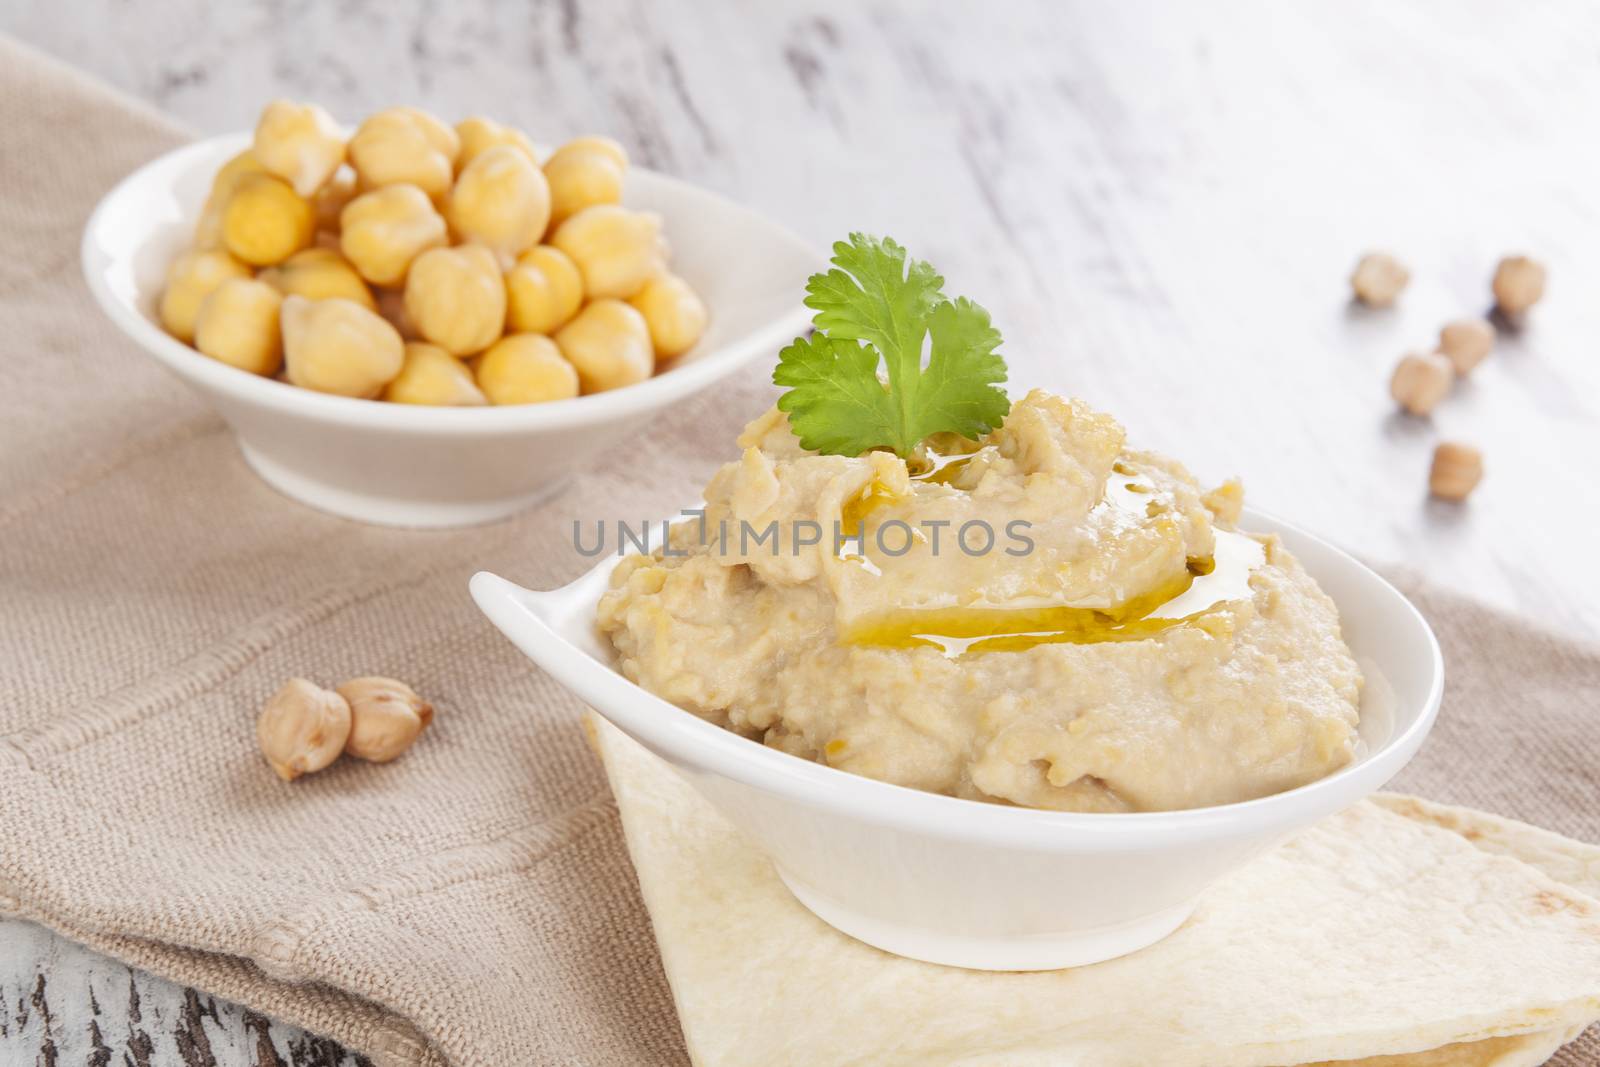 Chickpeas and hummus. by eskymaks